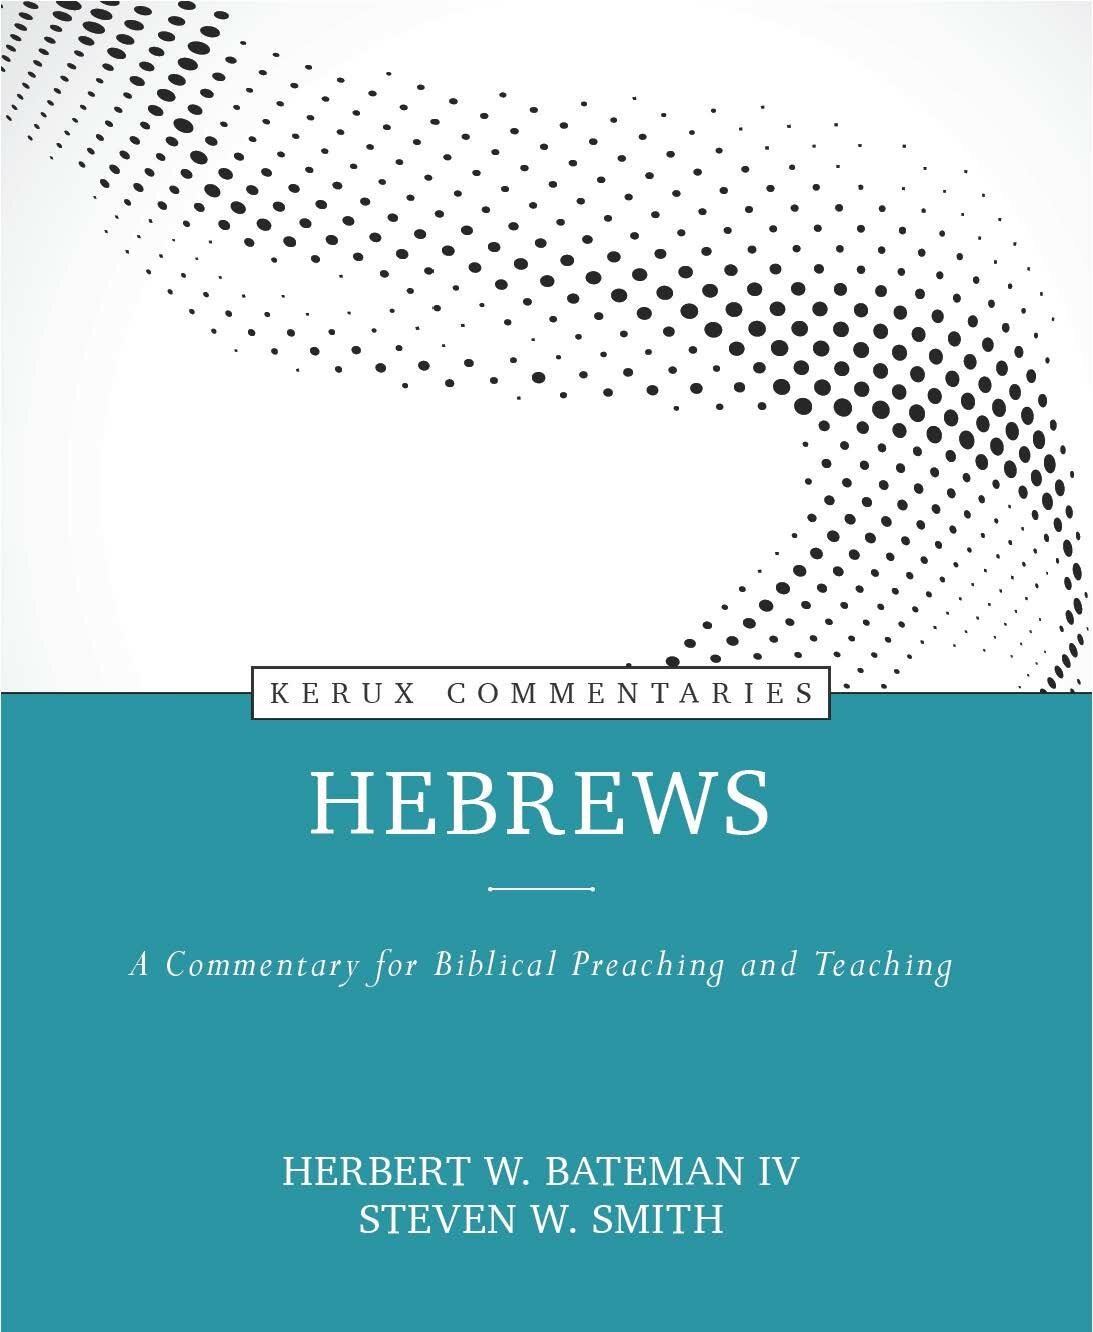 Hebrews: A Commentary for Biblical Preaching and Teaching (Kerux Commentaries | KC)